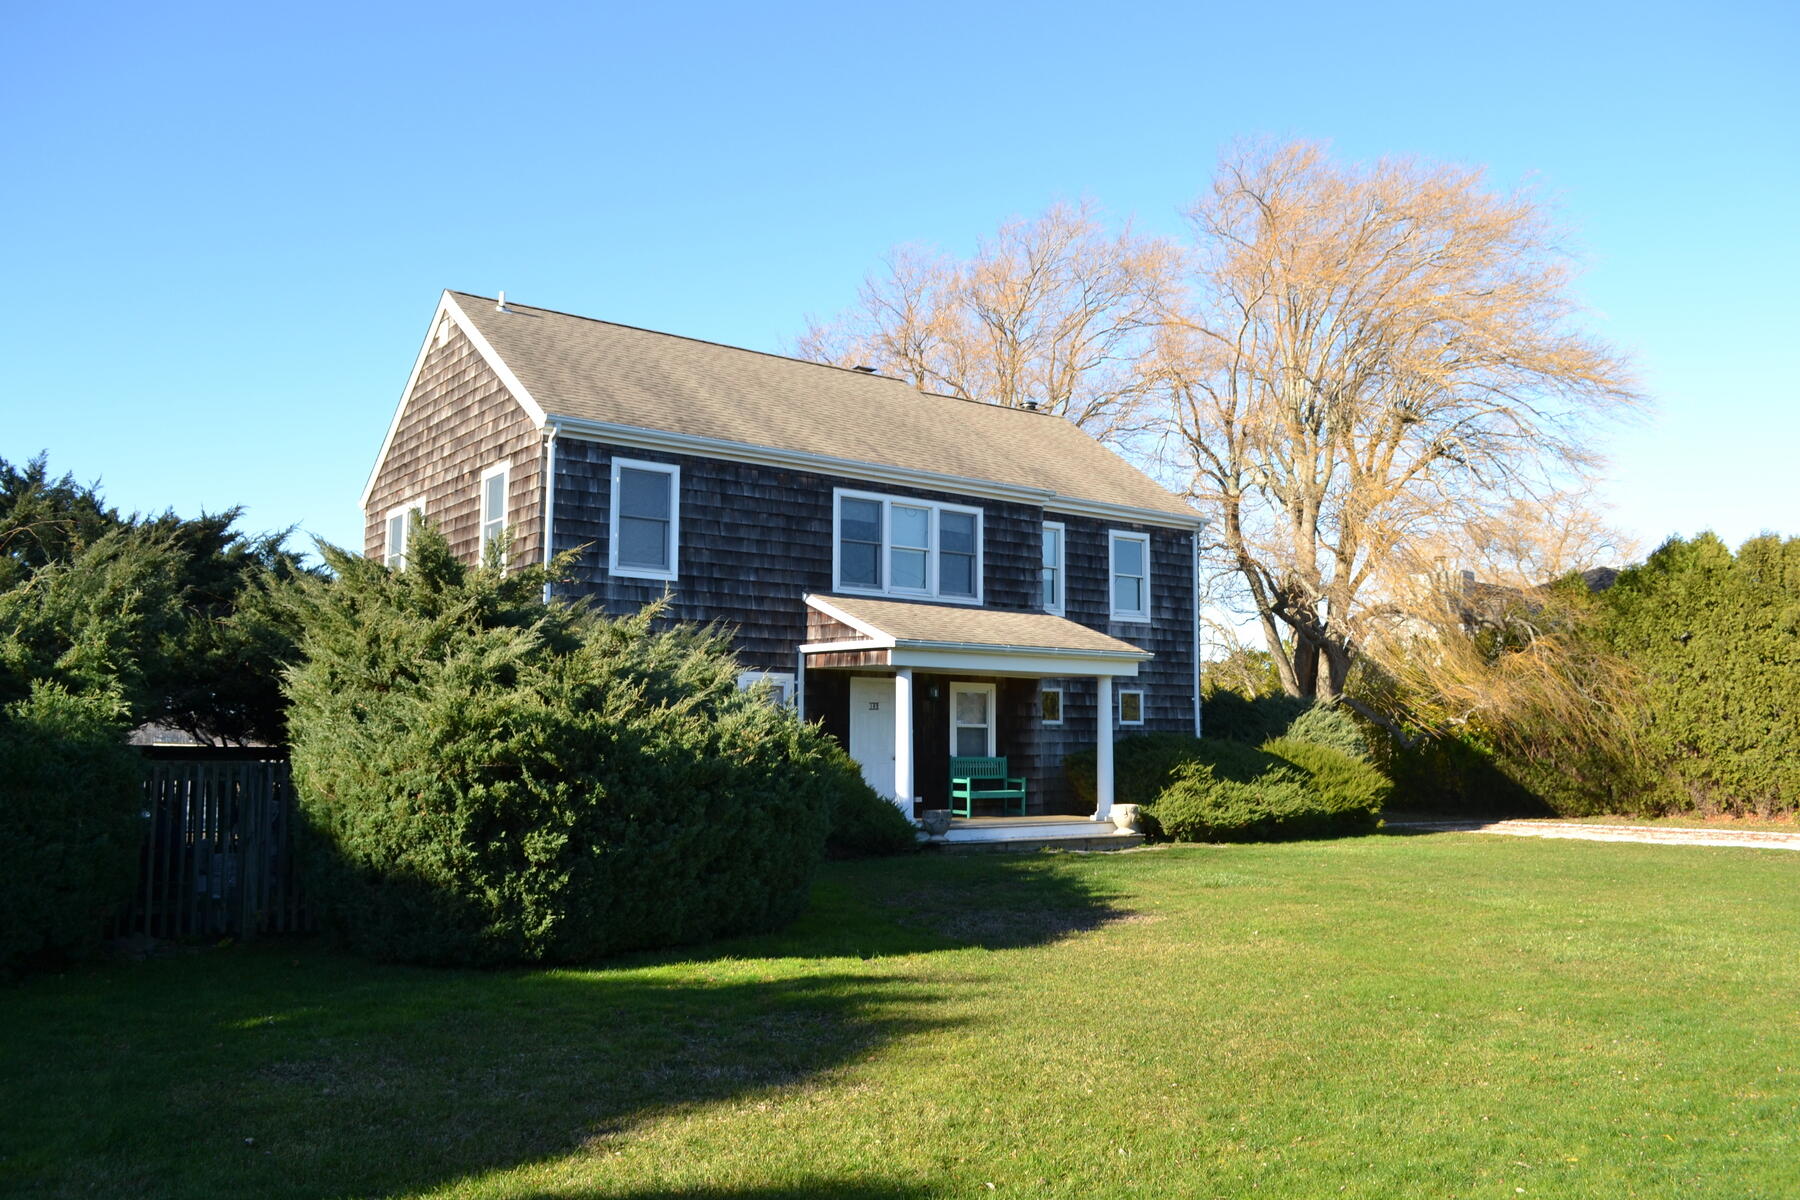 Mill Pond Lane, Water Mill, Hamptons, NY - 5 Bedrooms  
5 Bathrooms - 